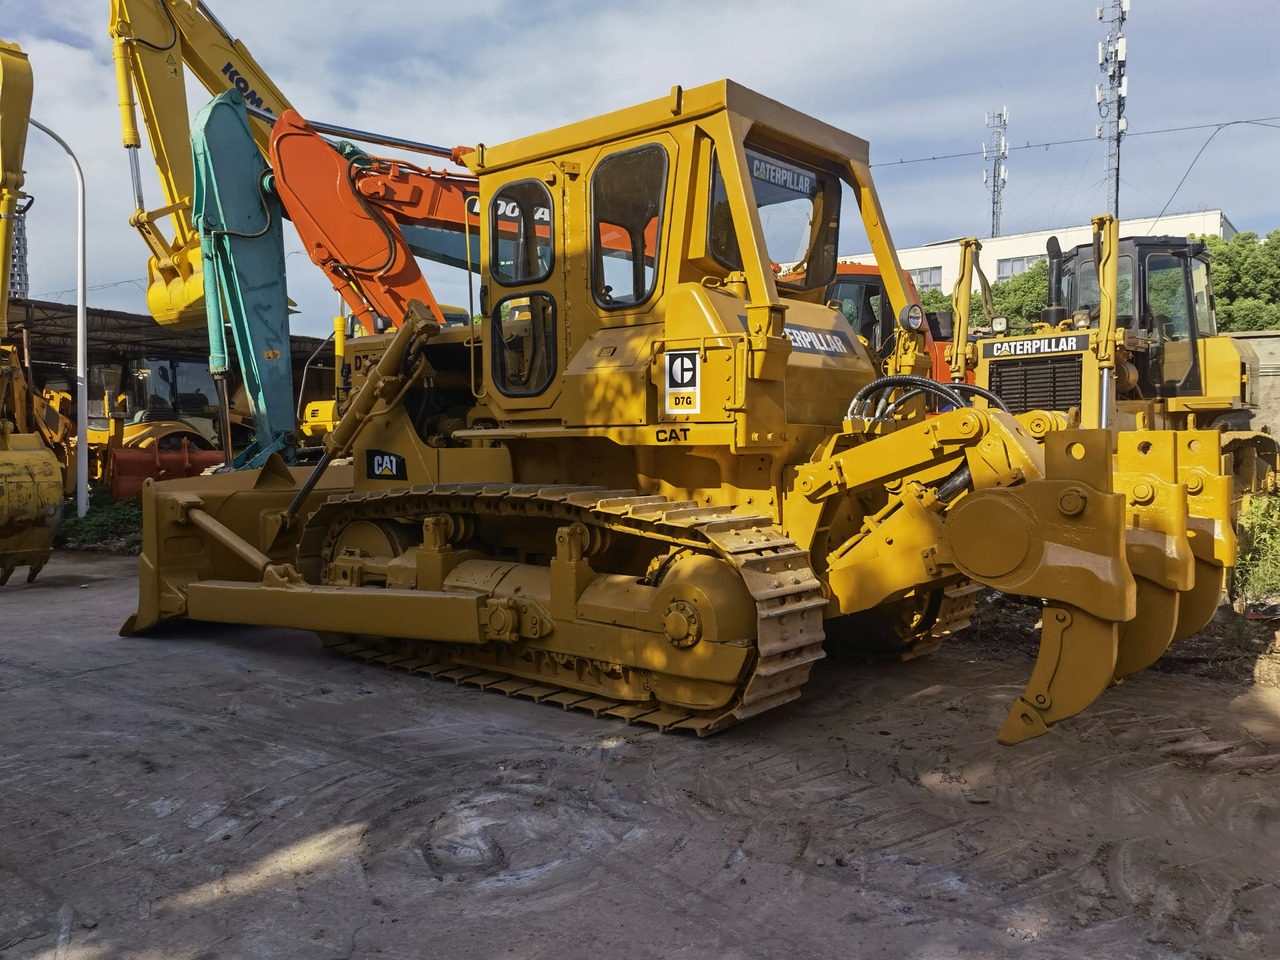 Used caterpillar bulldozer D7G secondhand caterpillar used bulldozer D7G D6G in stock now - Bulldozer: picture 4